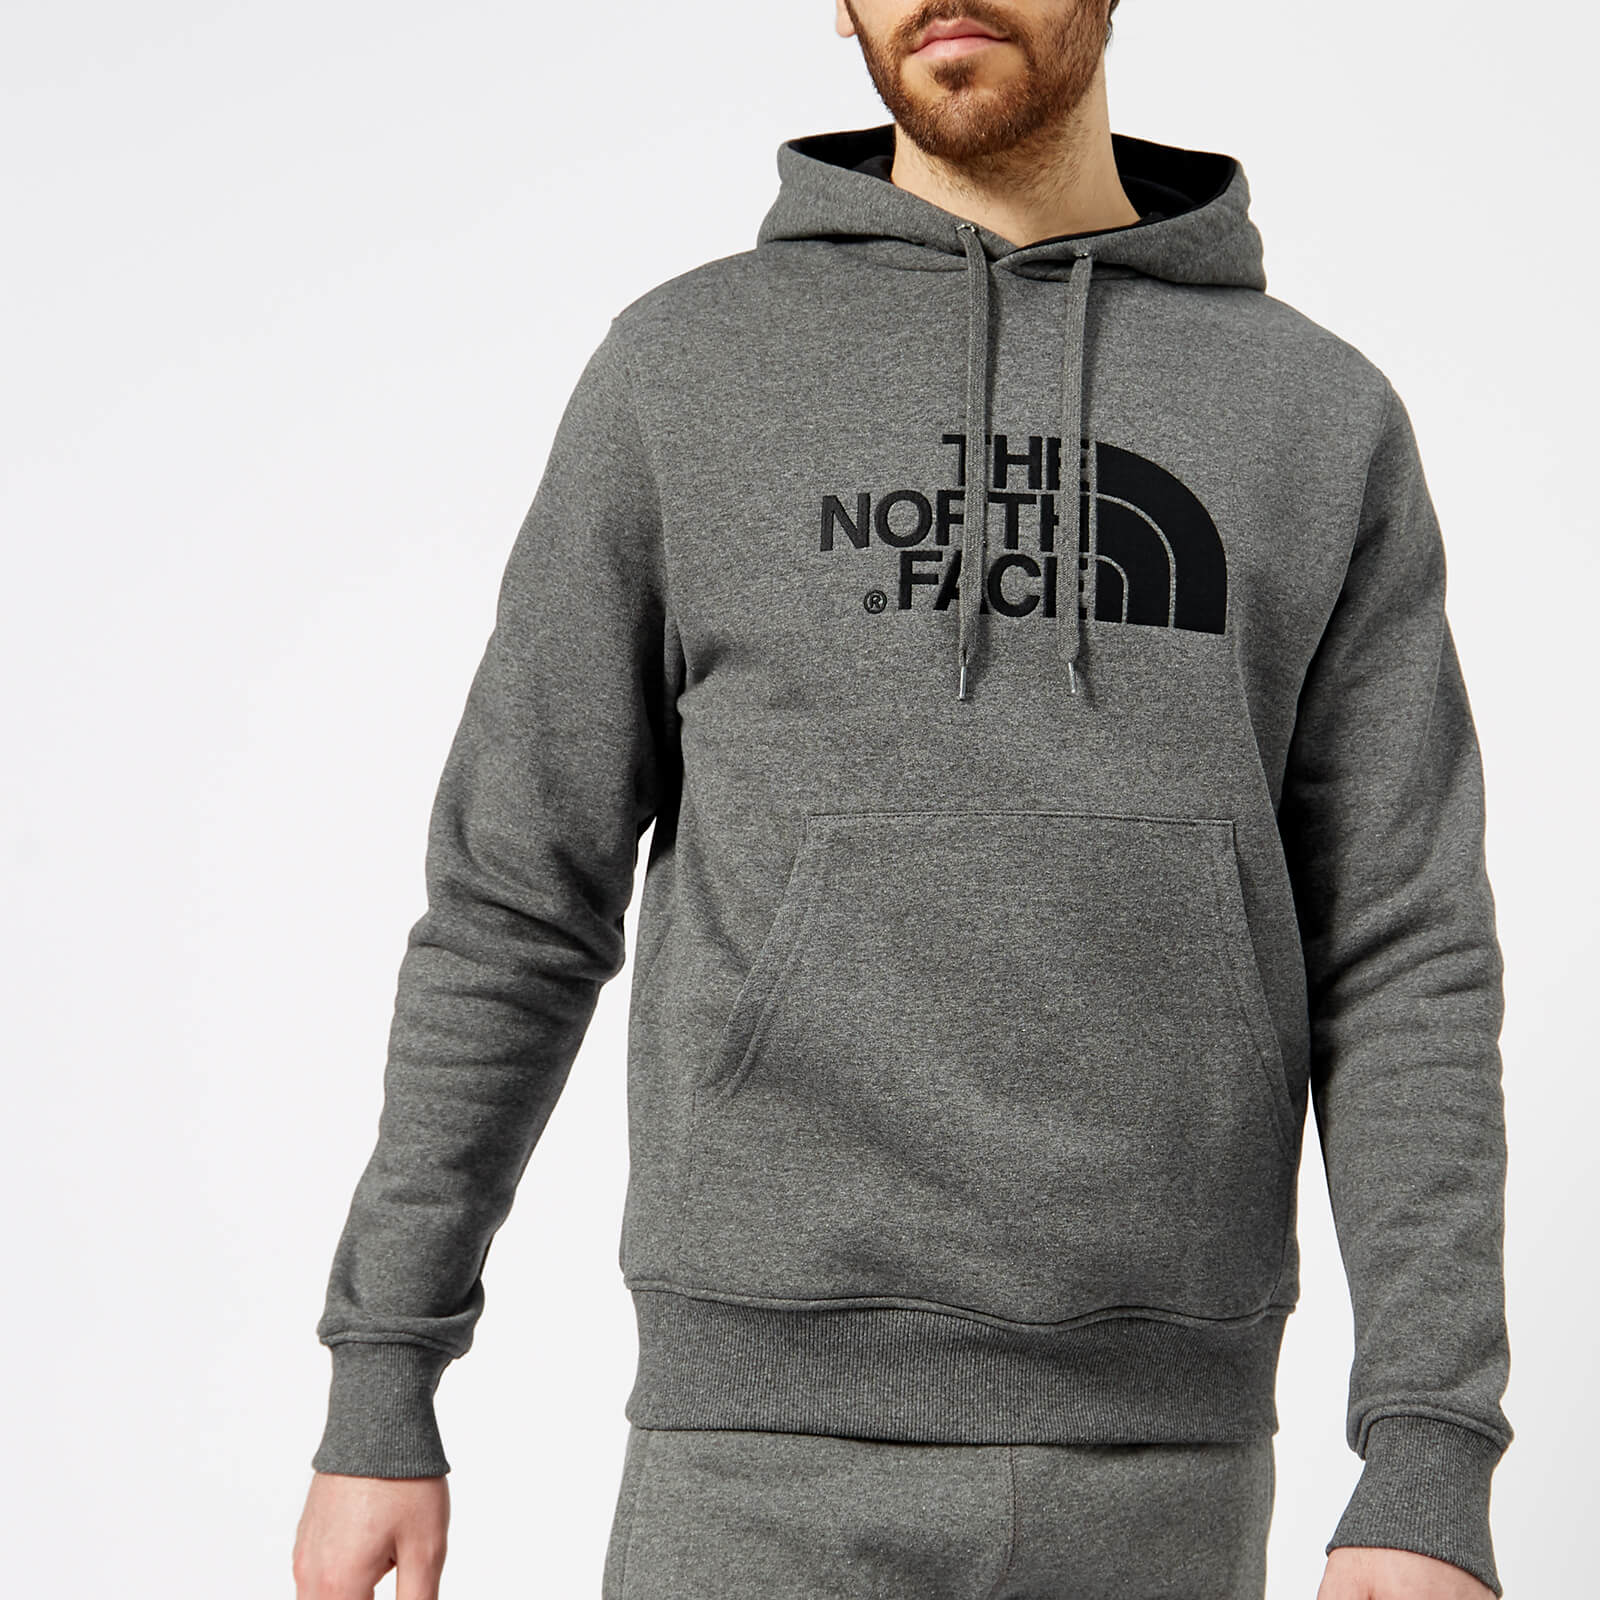 the north face jumper grey